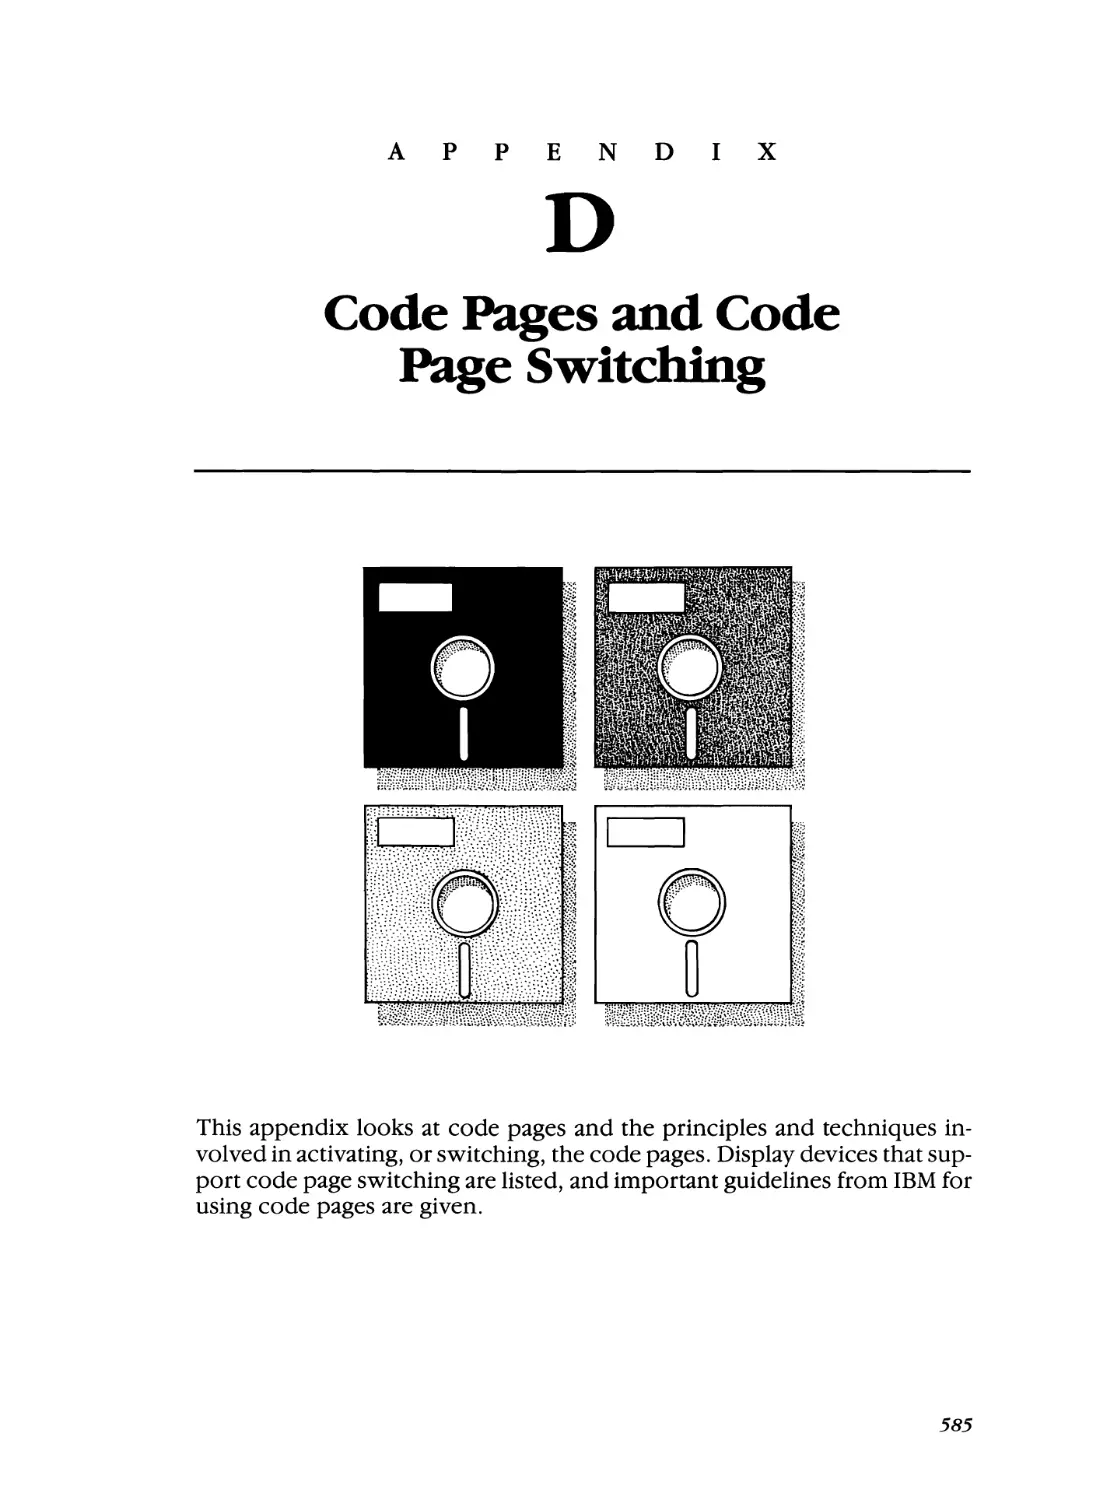 Appendix D - Code Pages and Code Page Switching